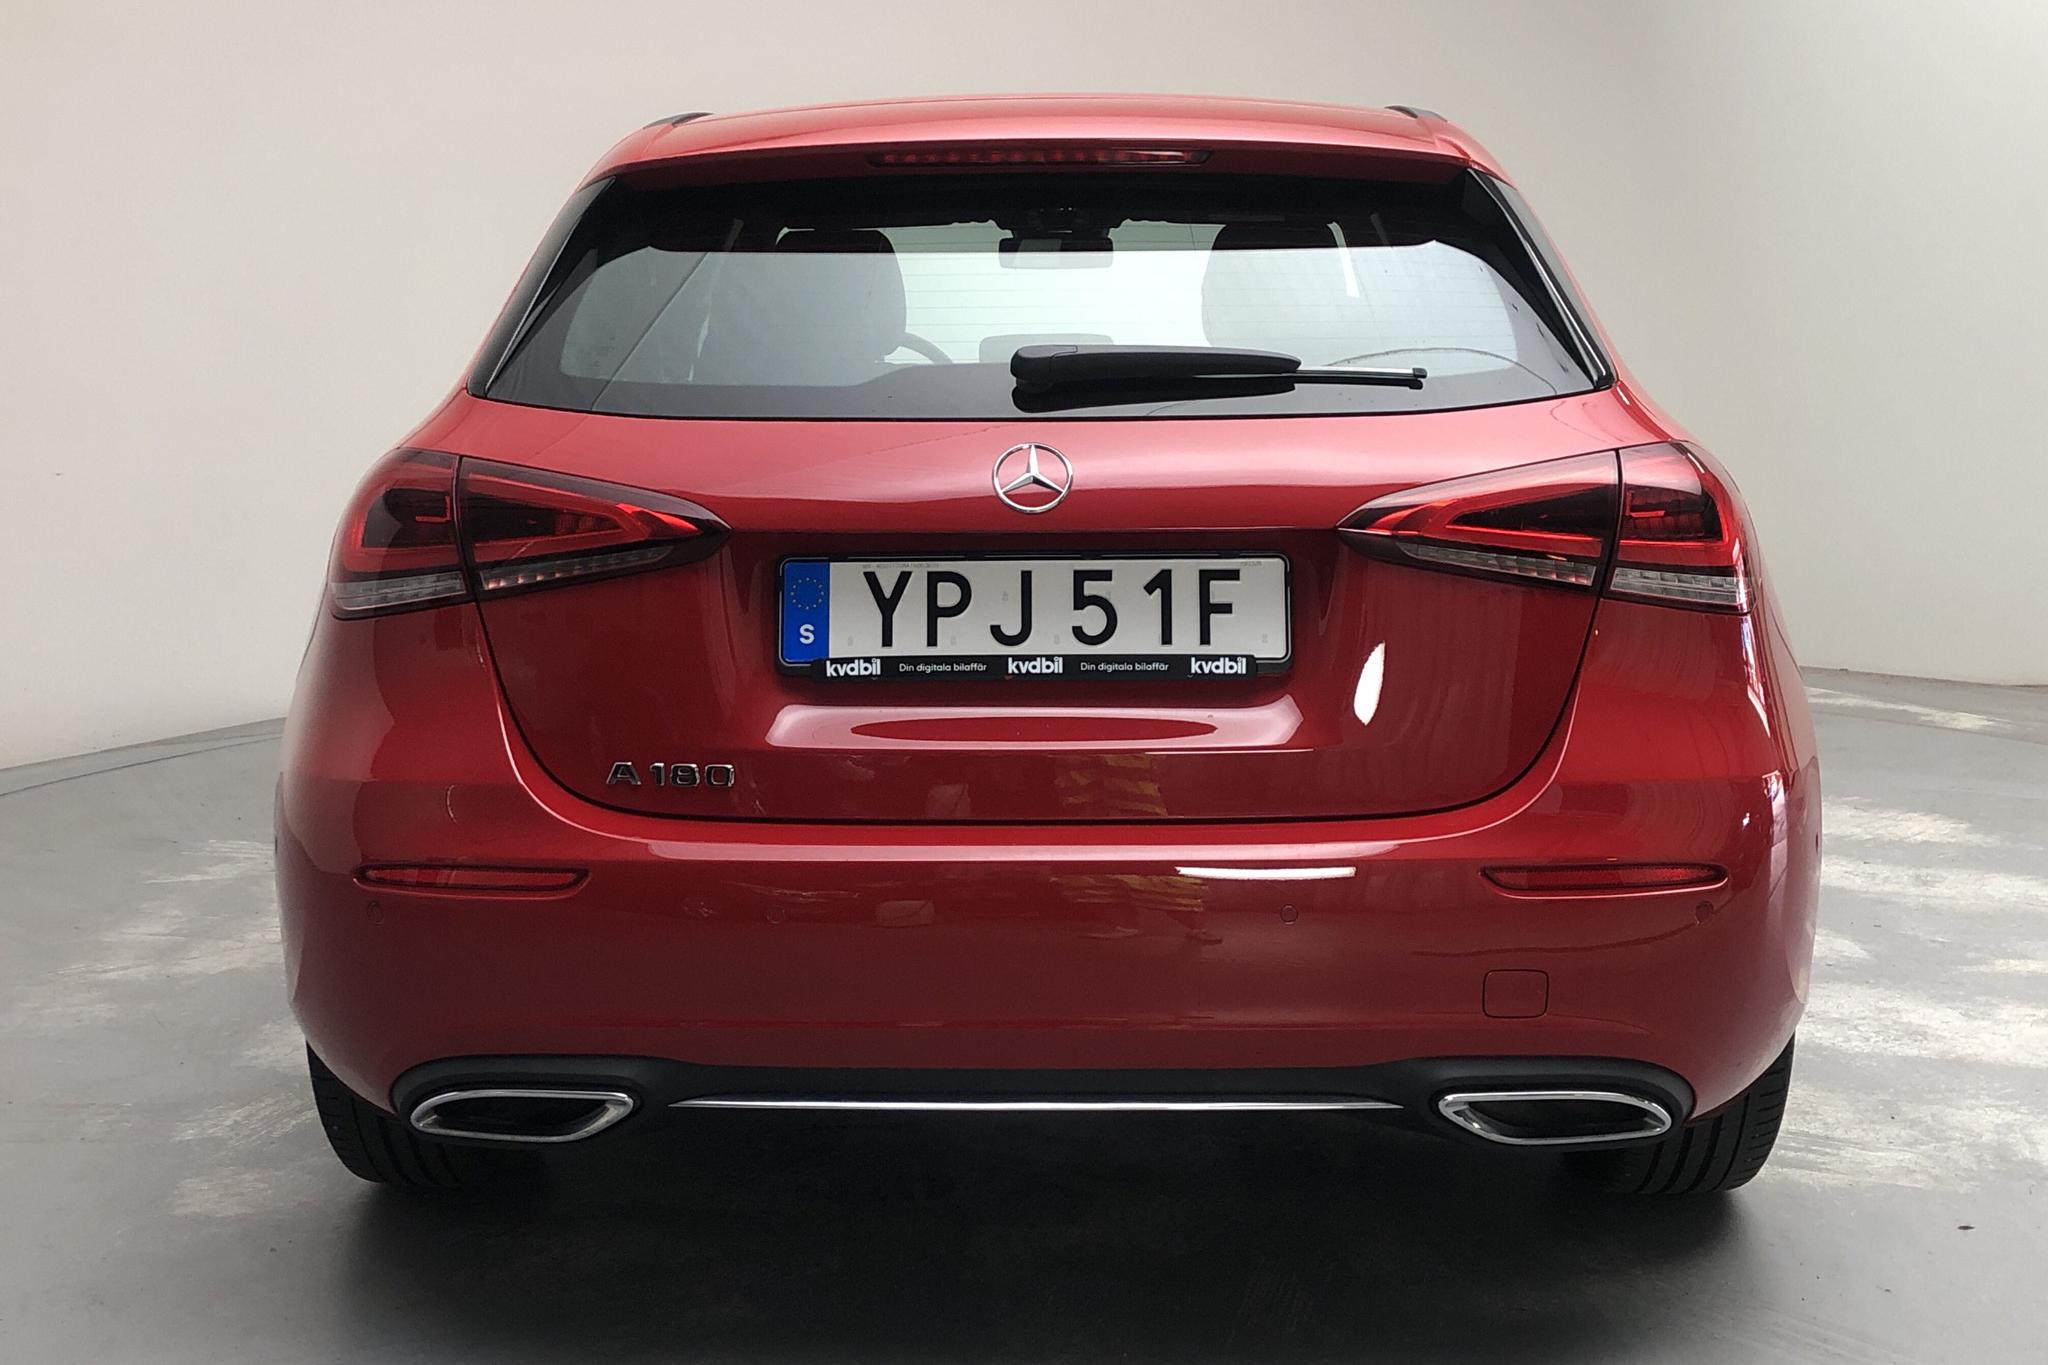 Mercedes A 180 5dr W177 (136hk) - 38 650 km - Automatic - red - 2019